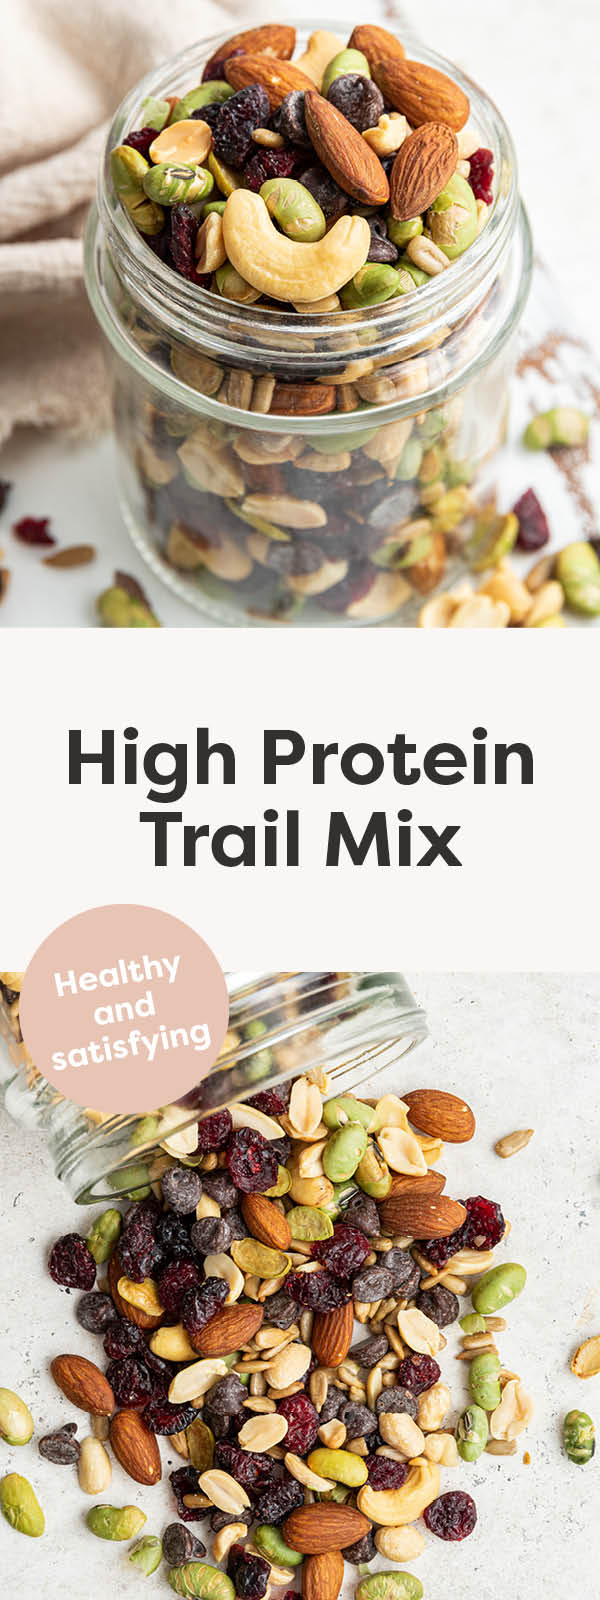 Two photos of a jar filled with High Protein Trail Mix.